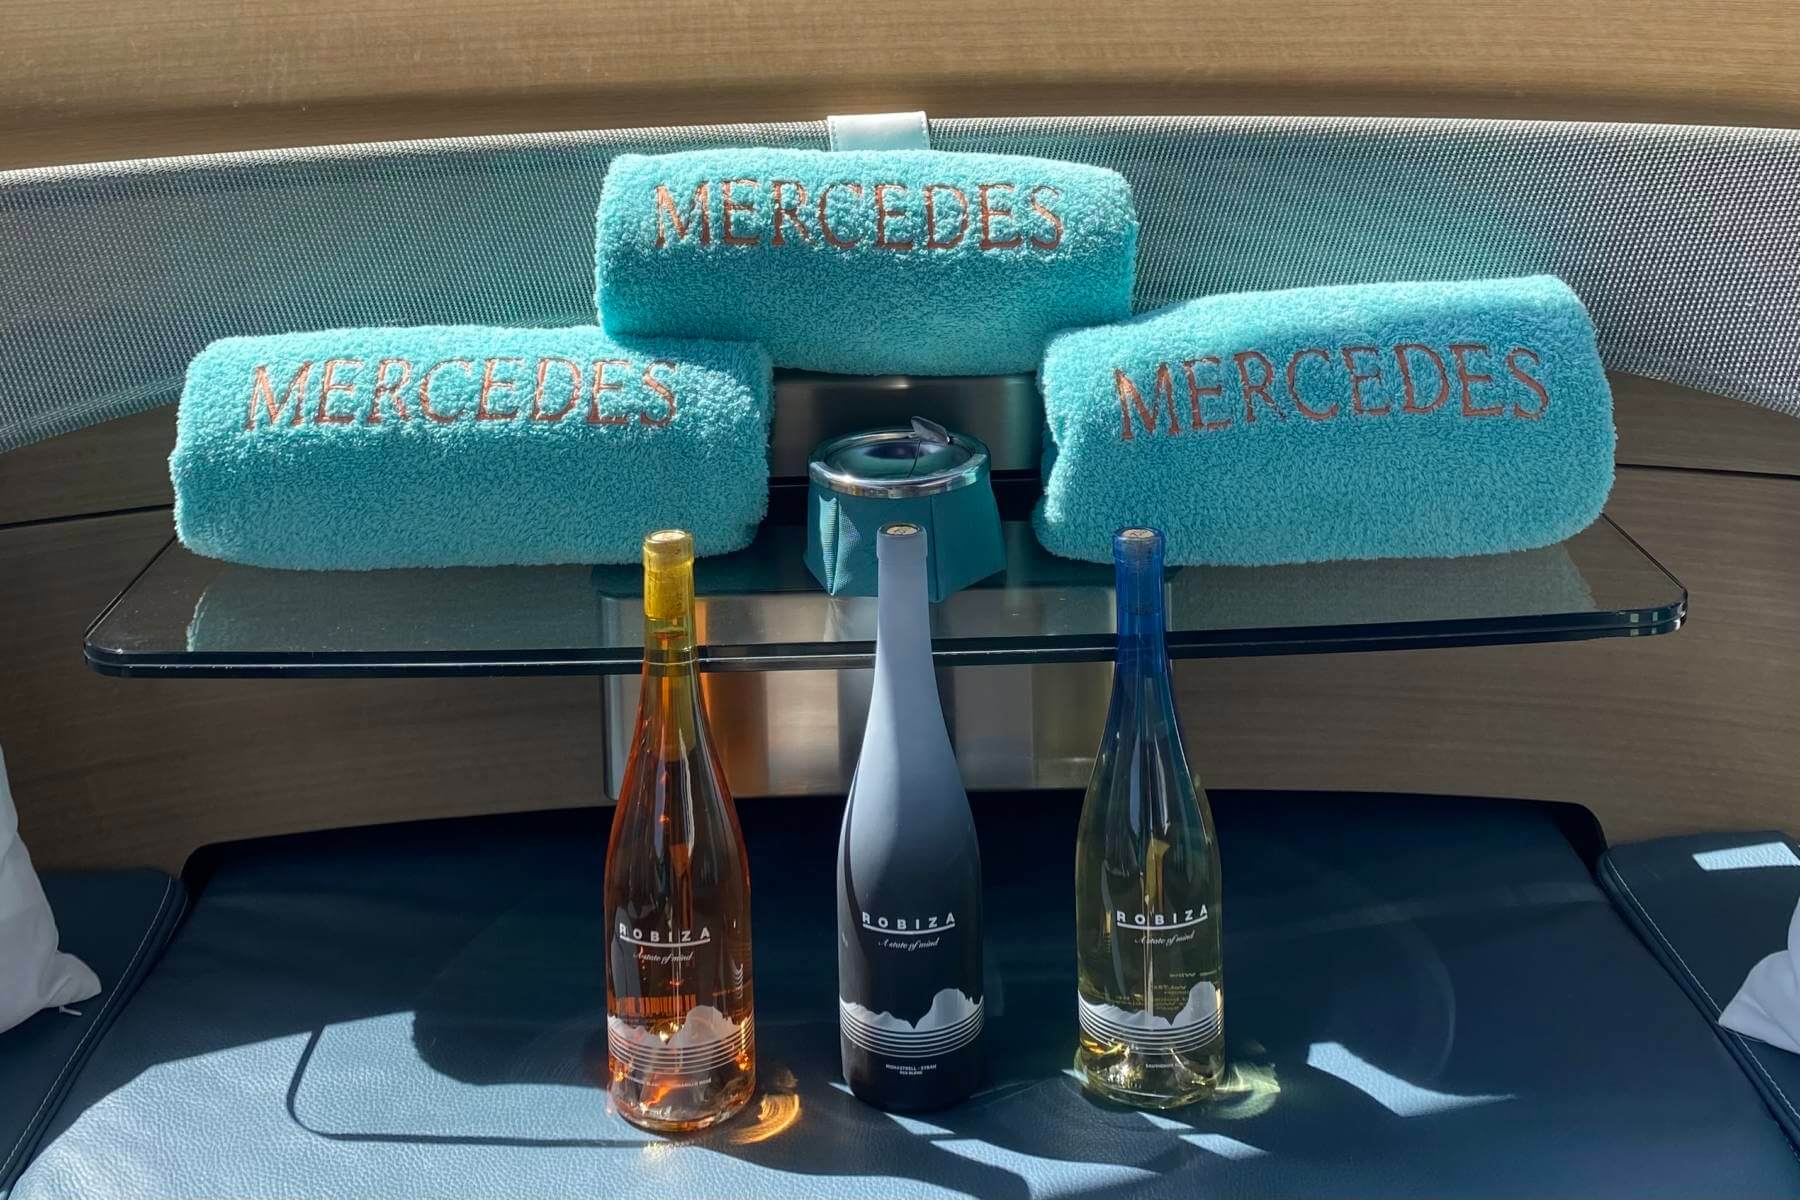 Luxuria is thrilled to announce Robiza wine partnering with Silver Arrow Marine by Mercedes Benz Style